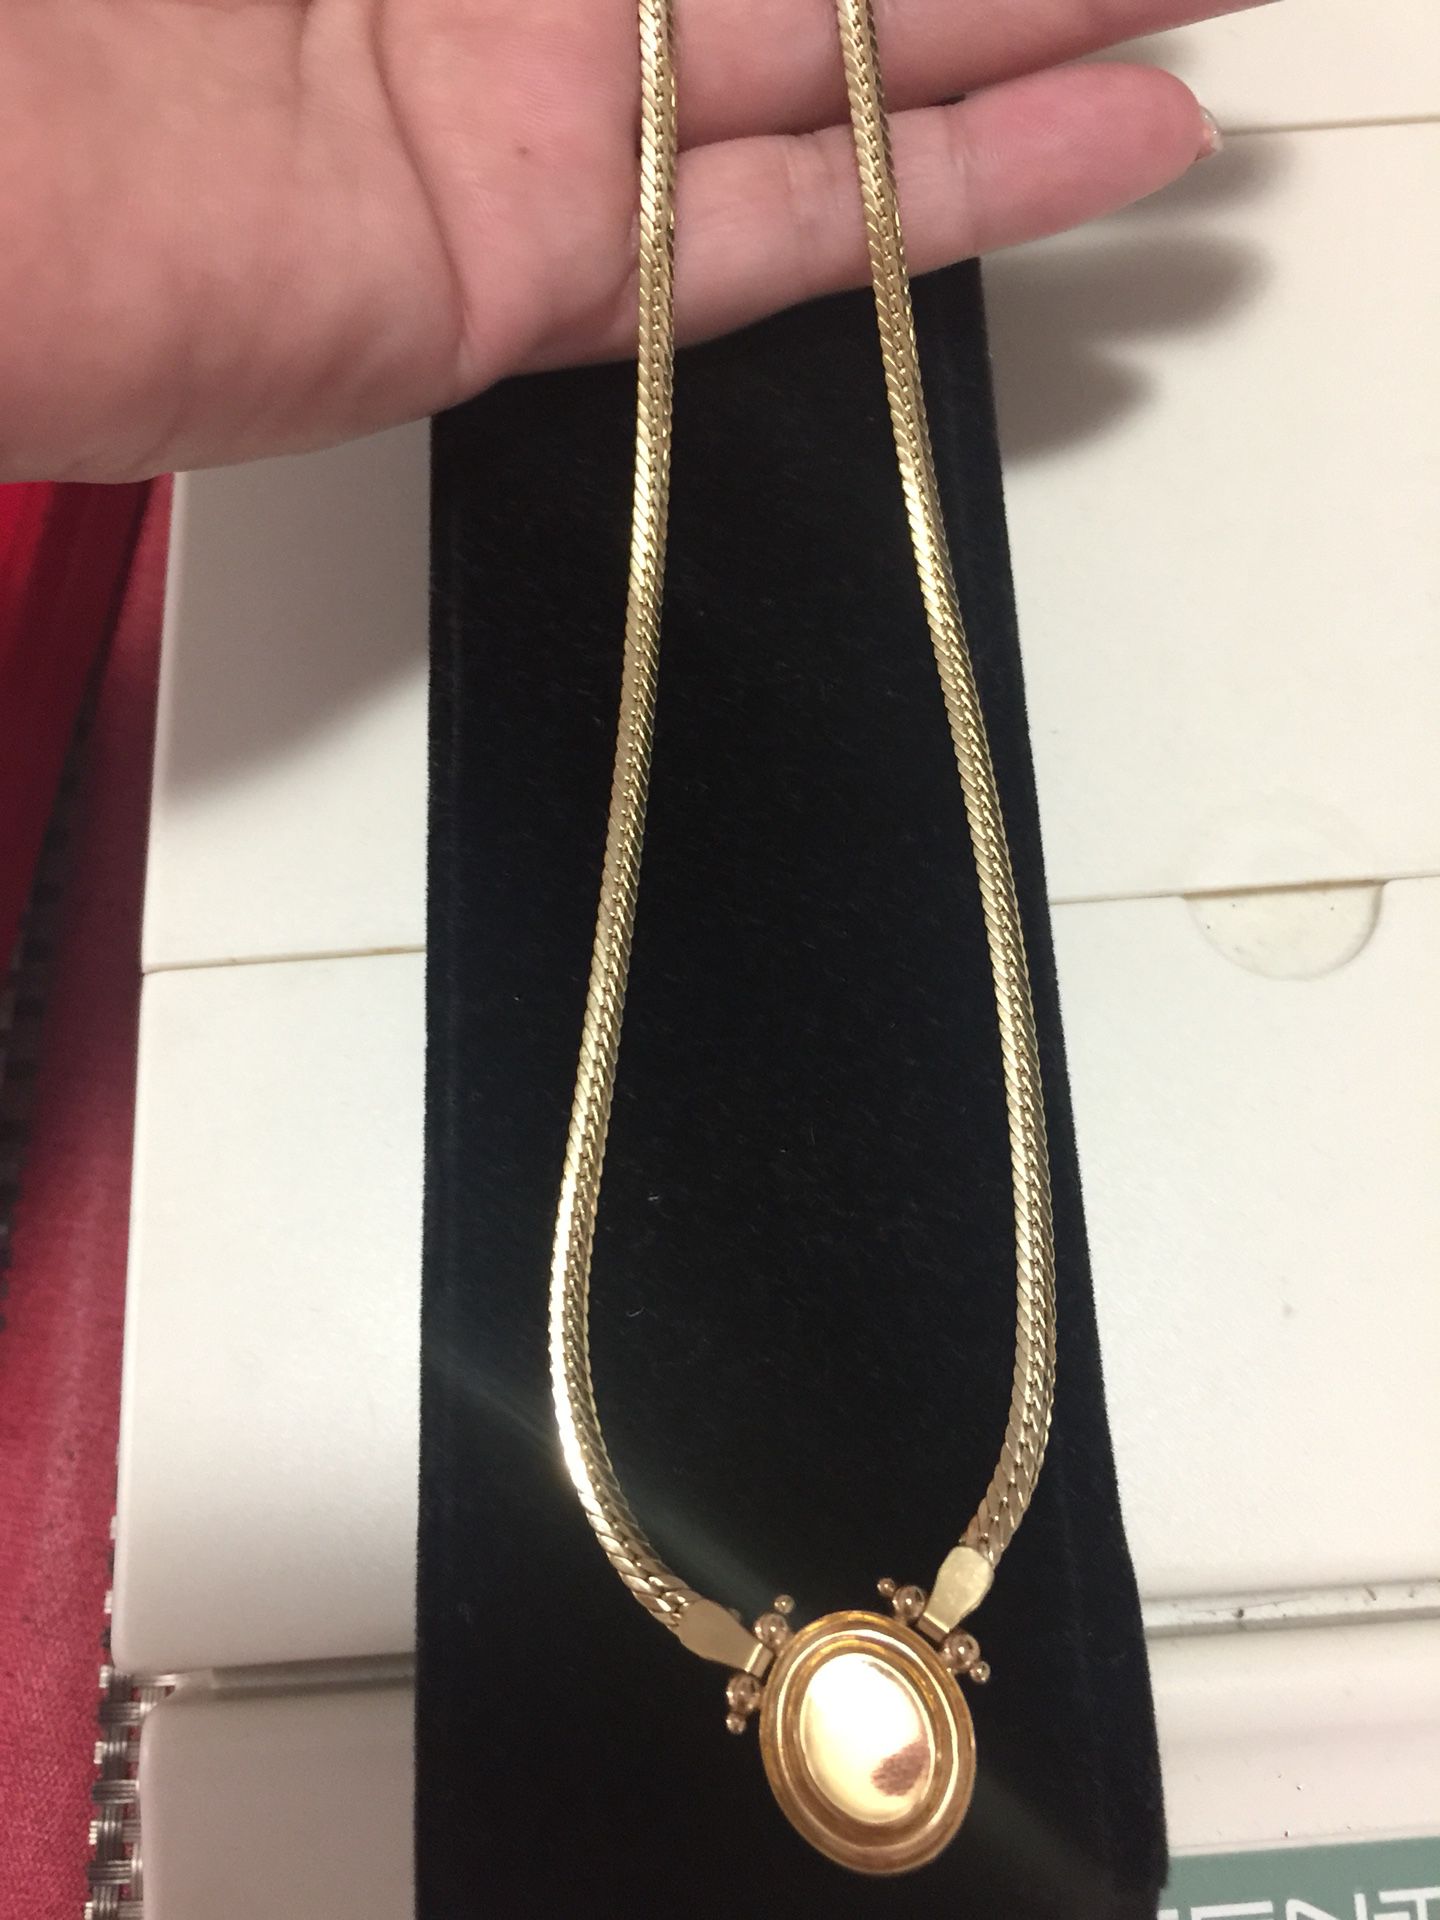 necklace size 18, 18k saudi gold for Sale in Anaheim, CA - OfferUp